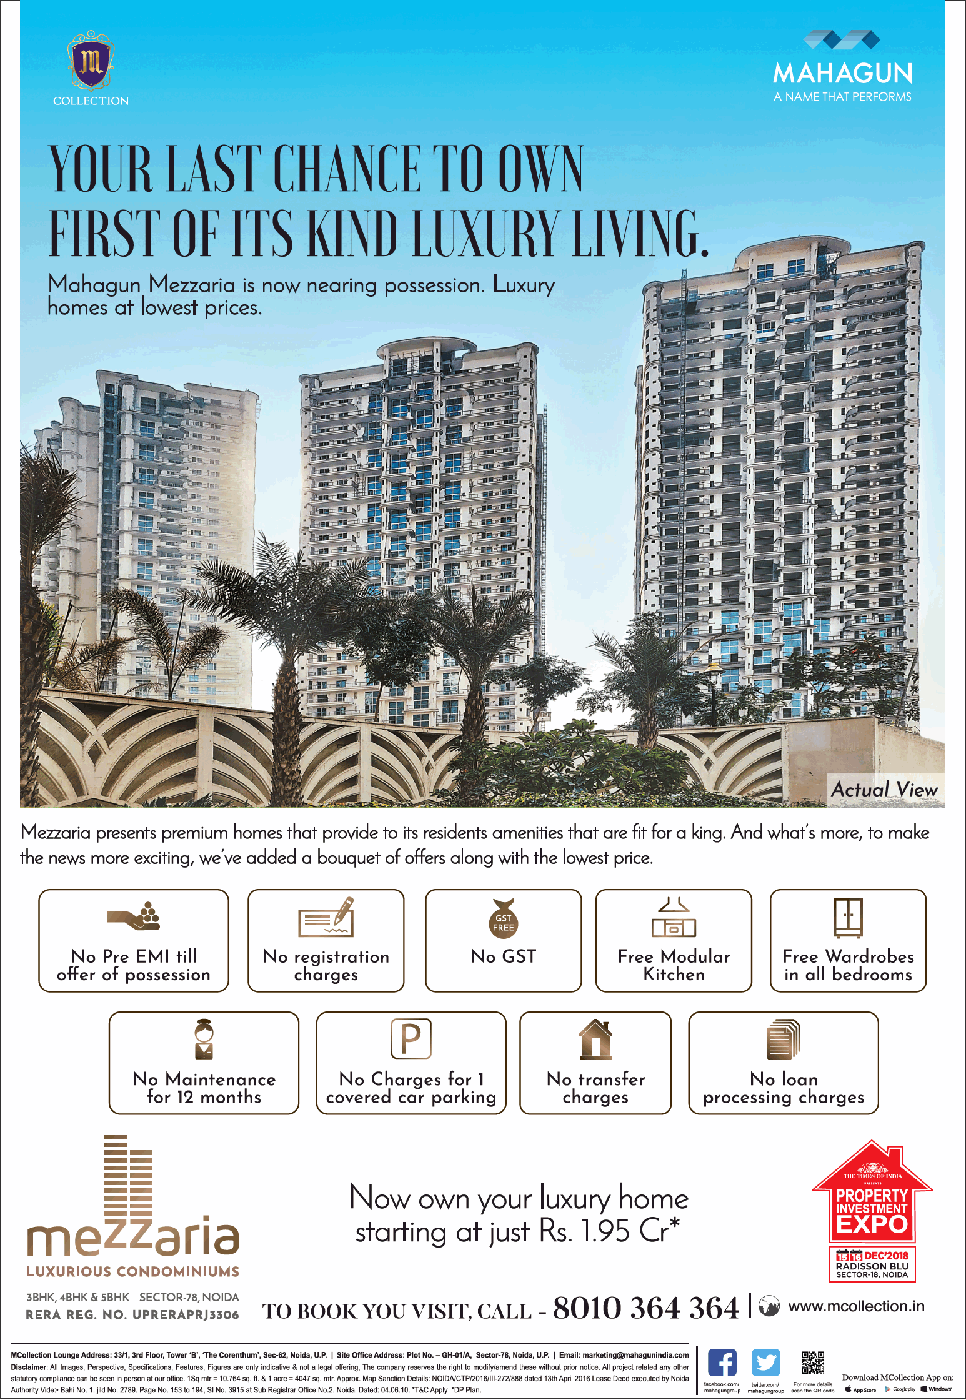 mahagun-your-last-chance-to-own-first-of-its-kind-luxury-living-ad-delhi-times-09-12-2018.png